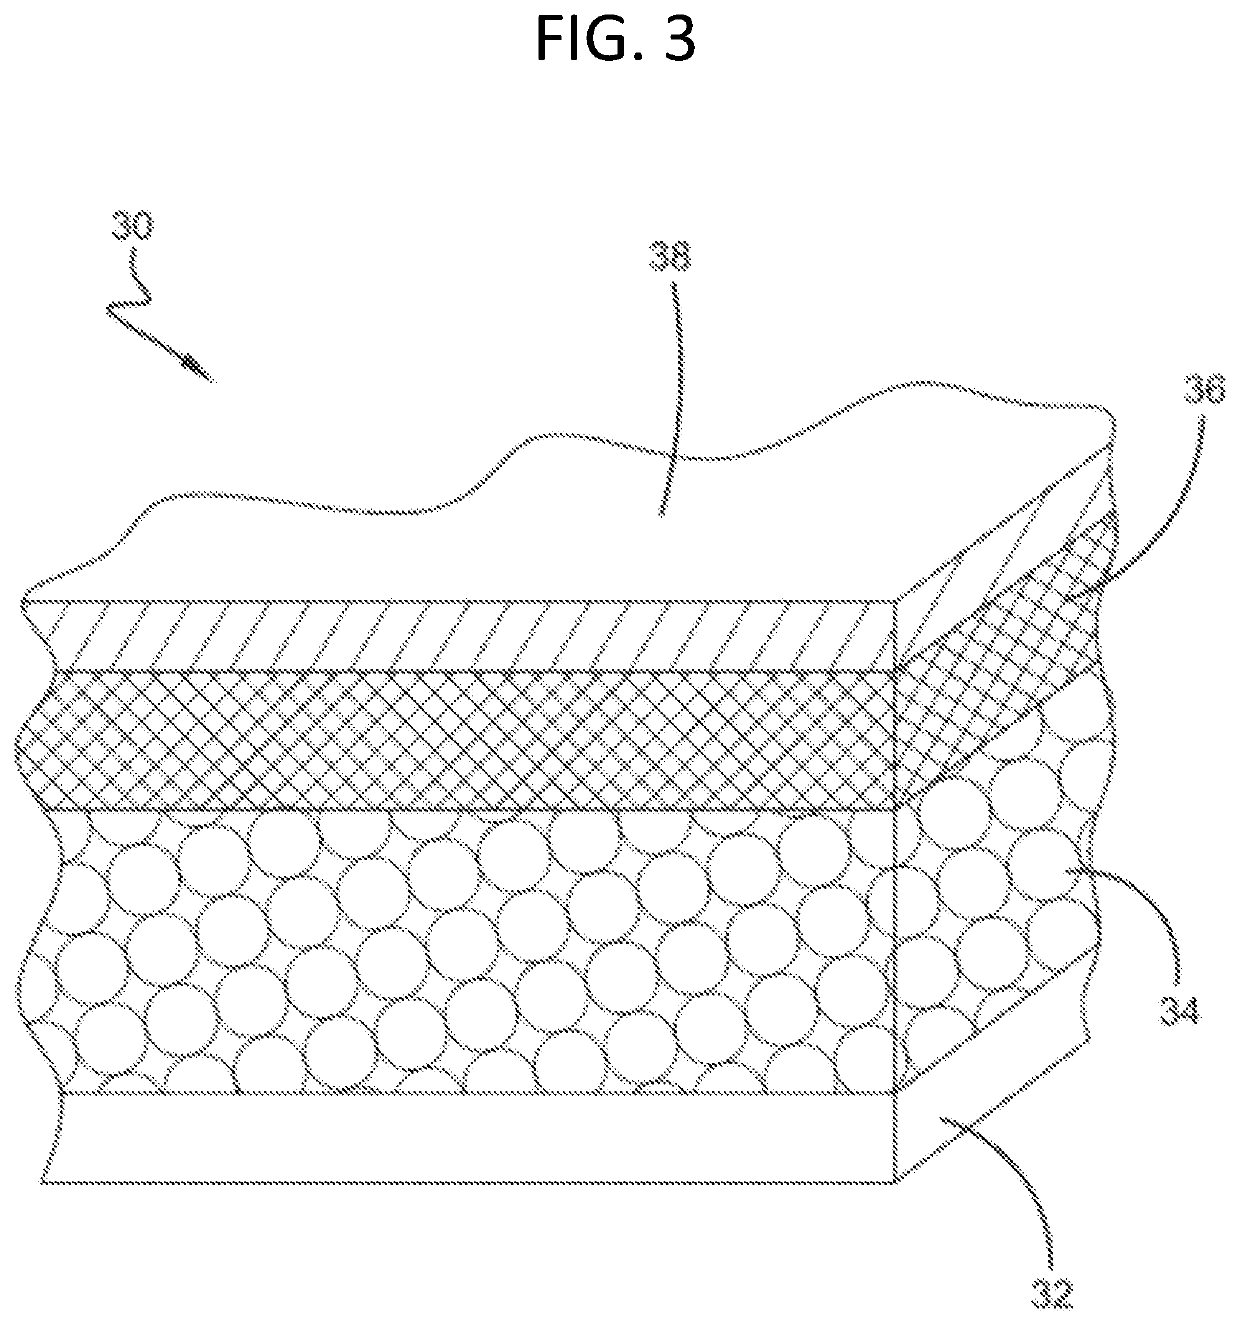 Process for producing isocyanate-based foam construction boards